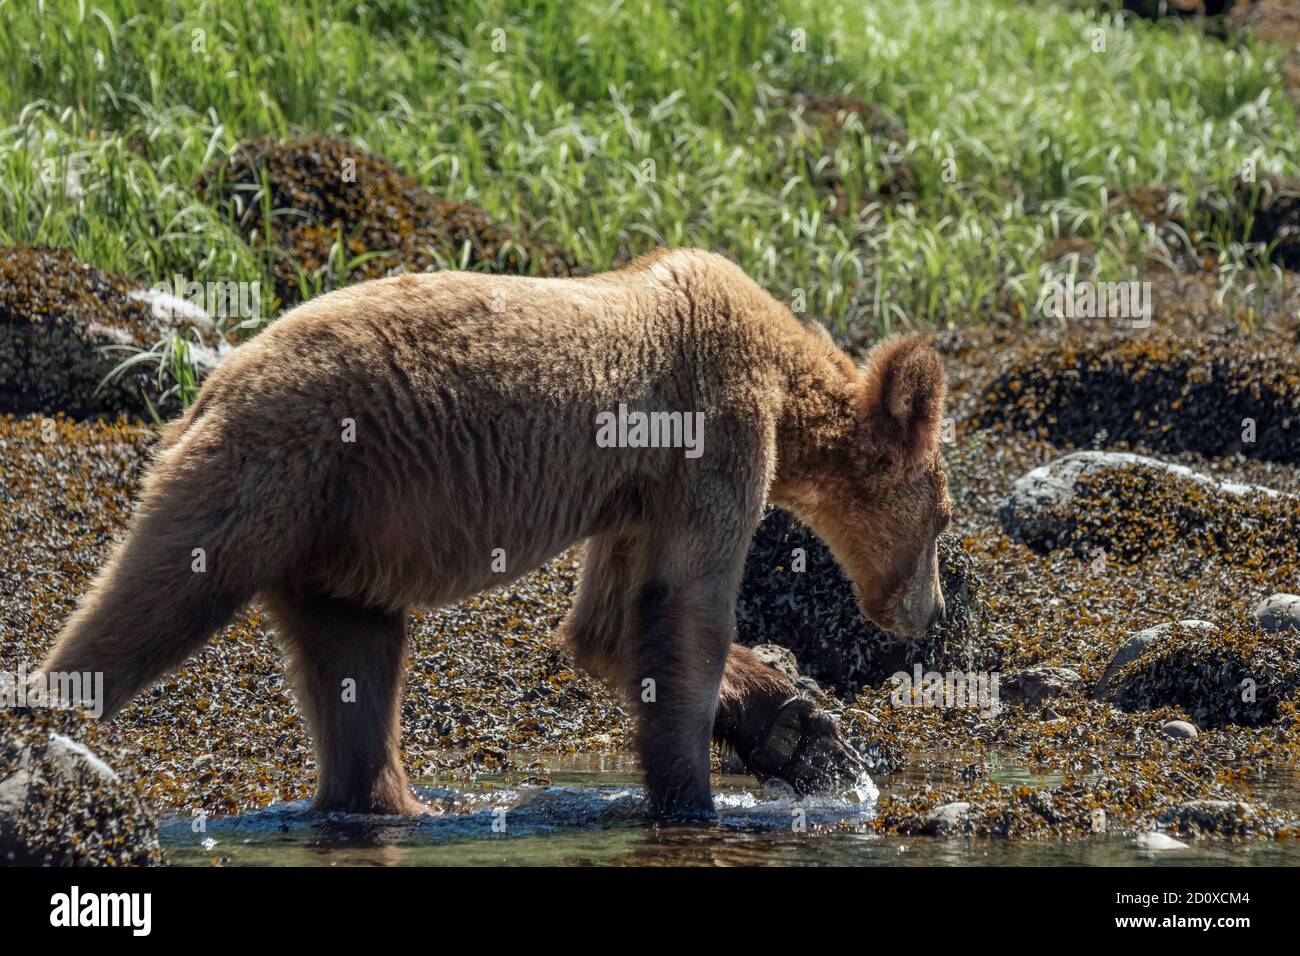 Grizzly cub walking in the water by rockweed at low tide, Khutzeymateen Inlet, BC Stock Photo